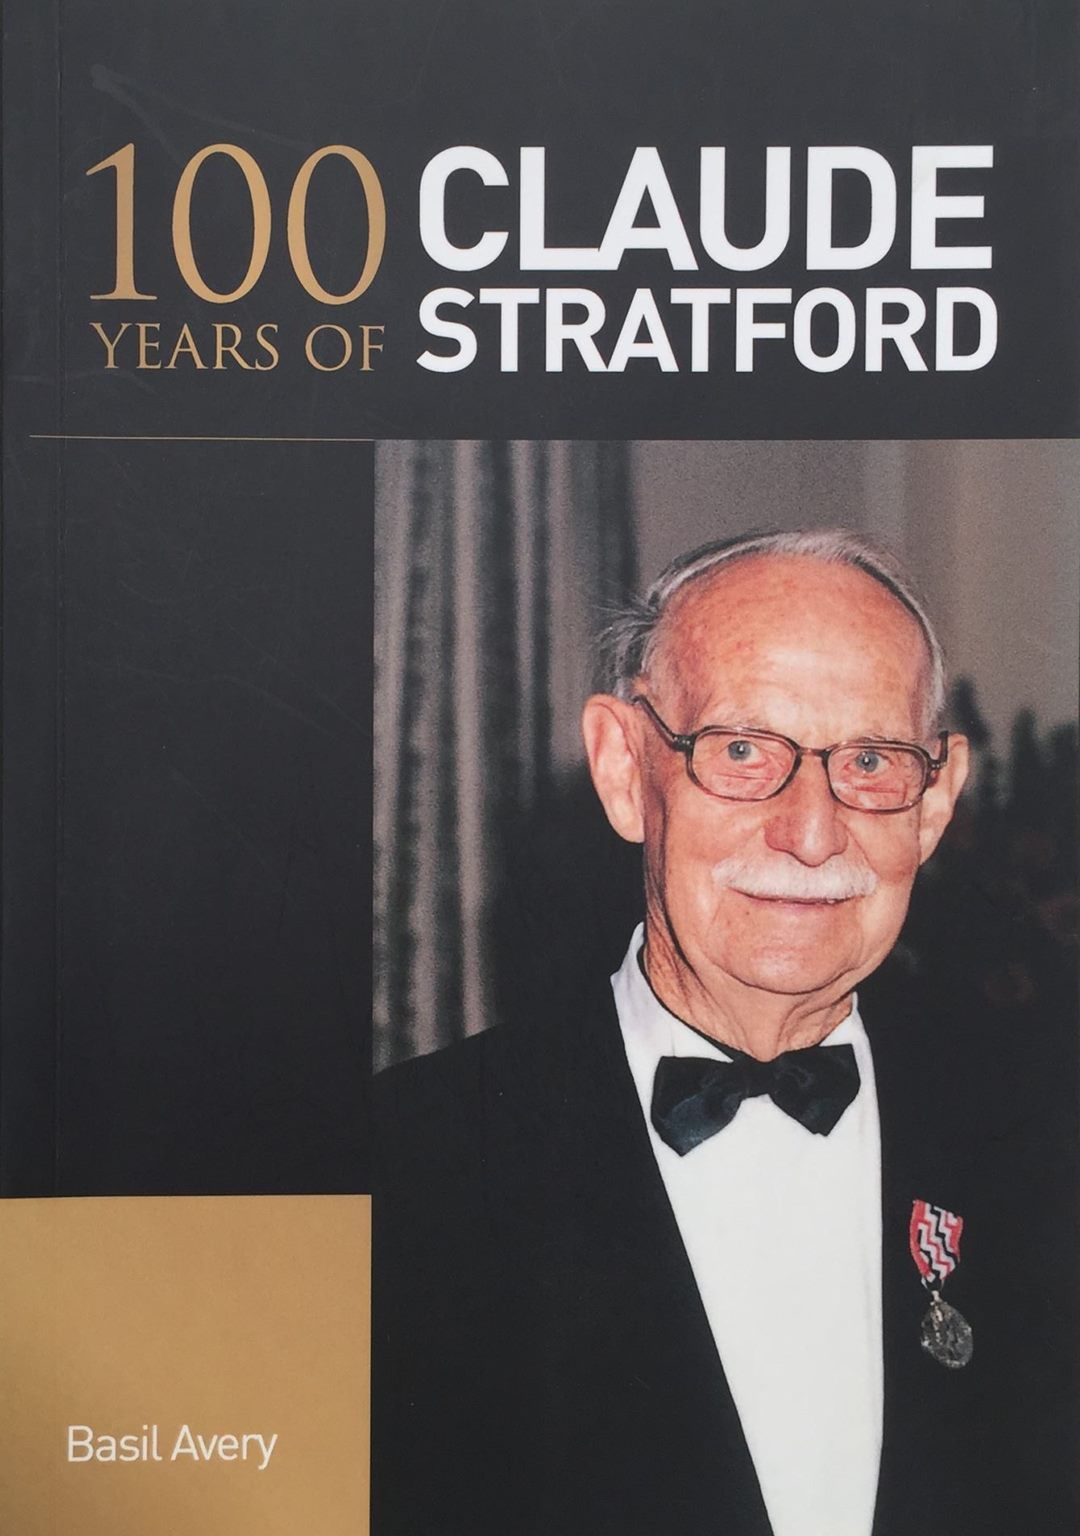 100 YEARS OF CLAUDE STRATFORD